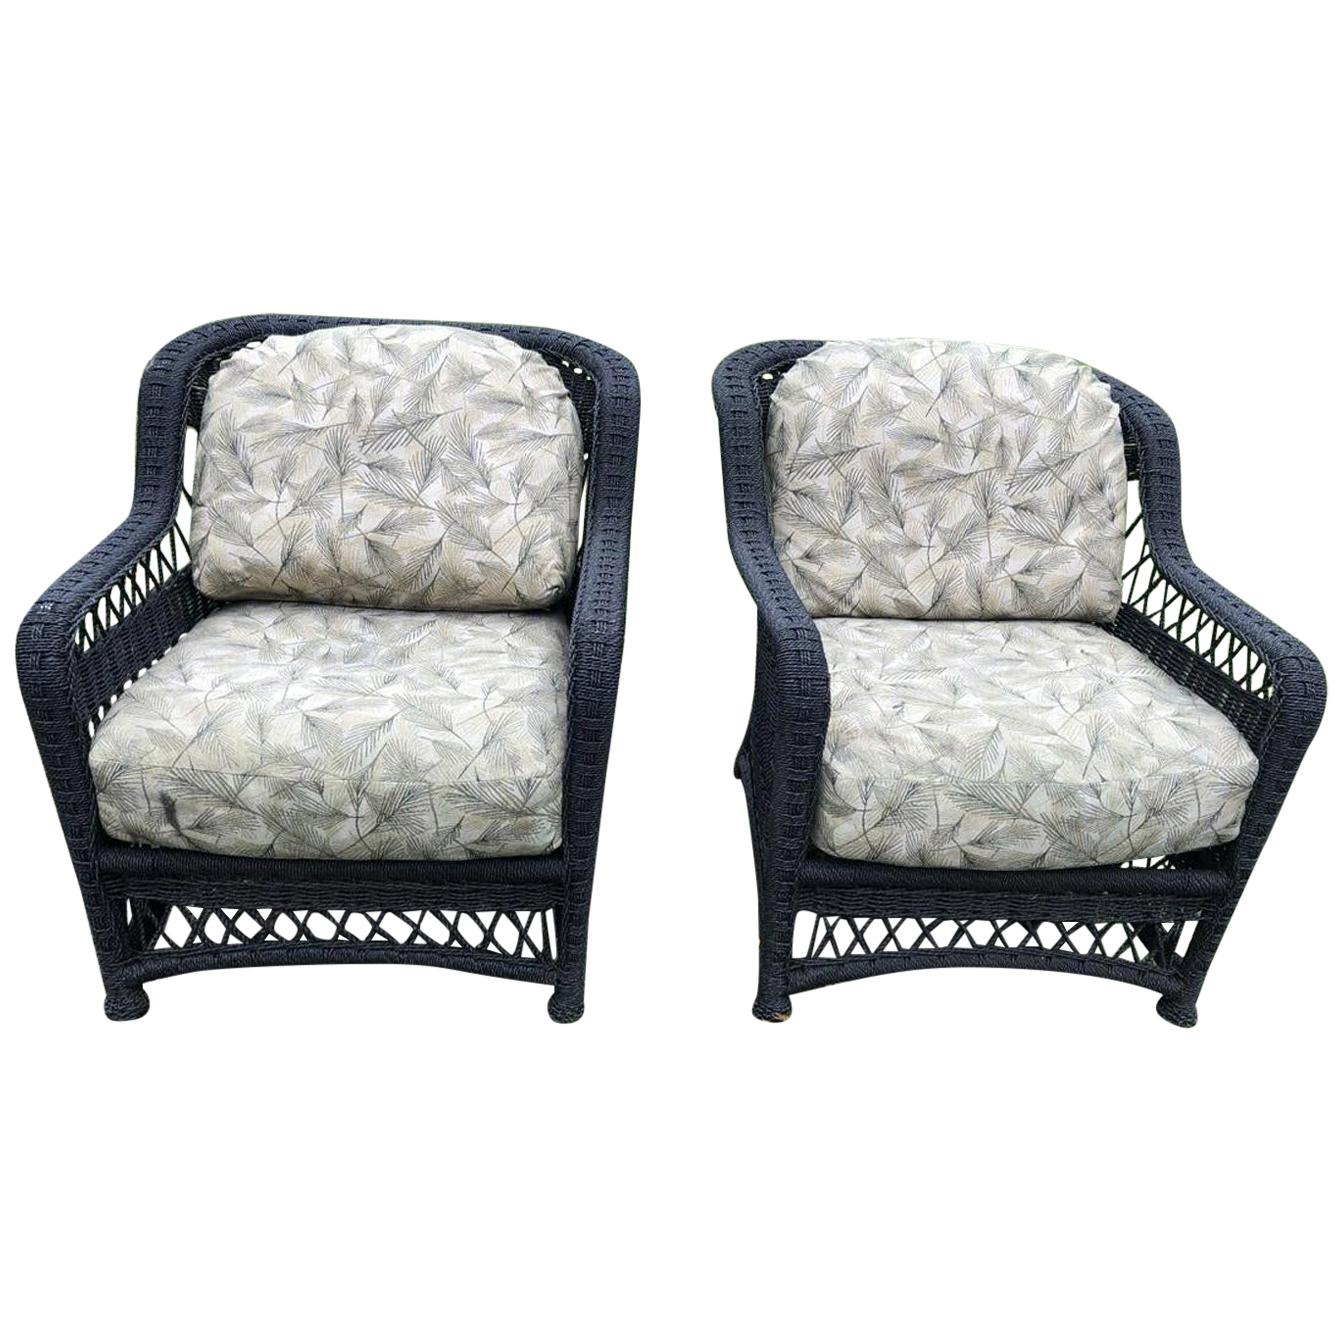 Pair of Victorian Style Outdoor Wicker Armchairs